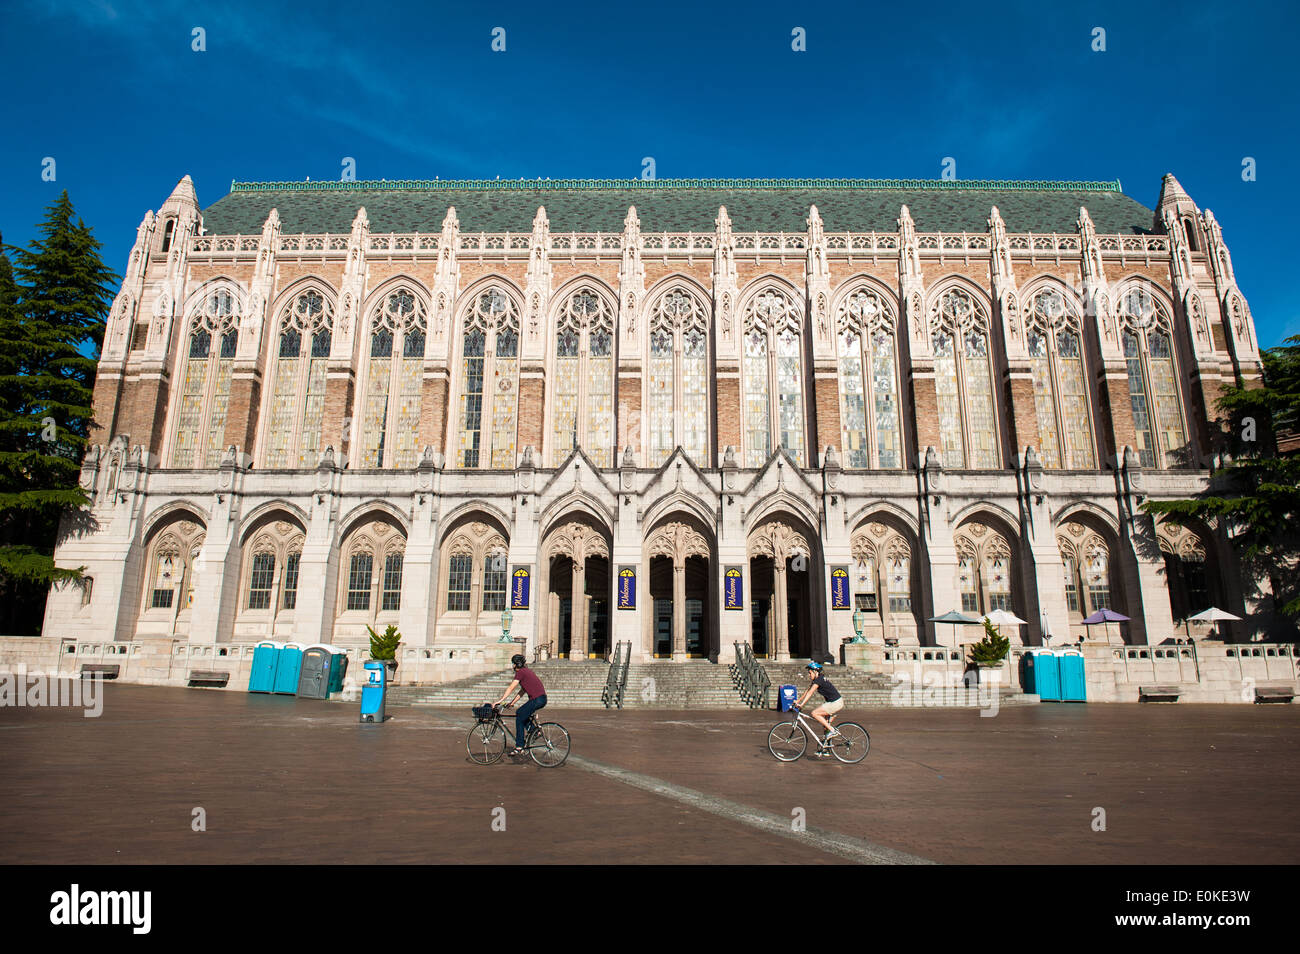 The Suzzallo Library at the University of Washington in Seattle. Stock Photo